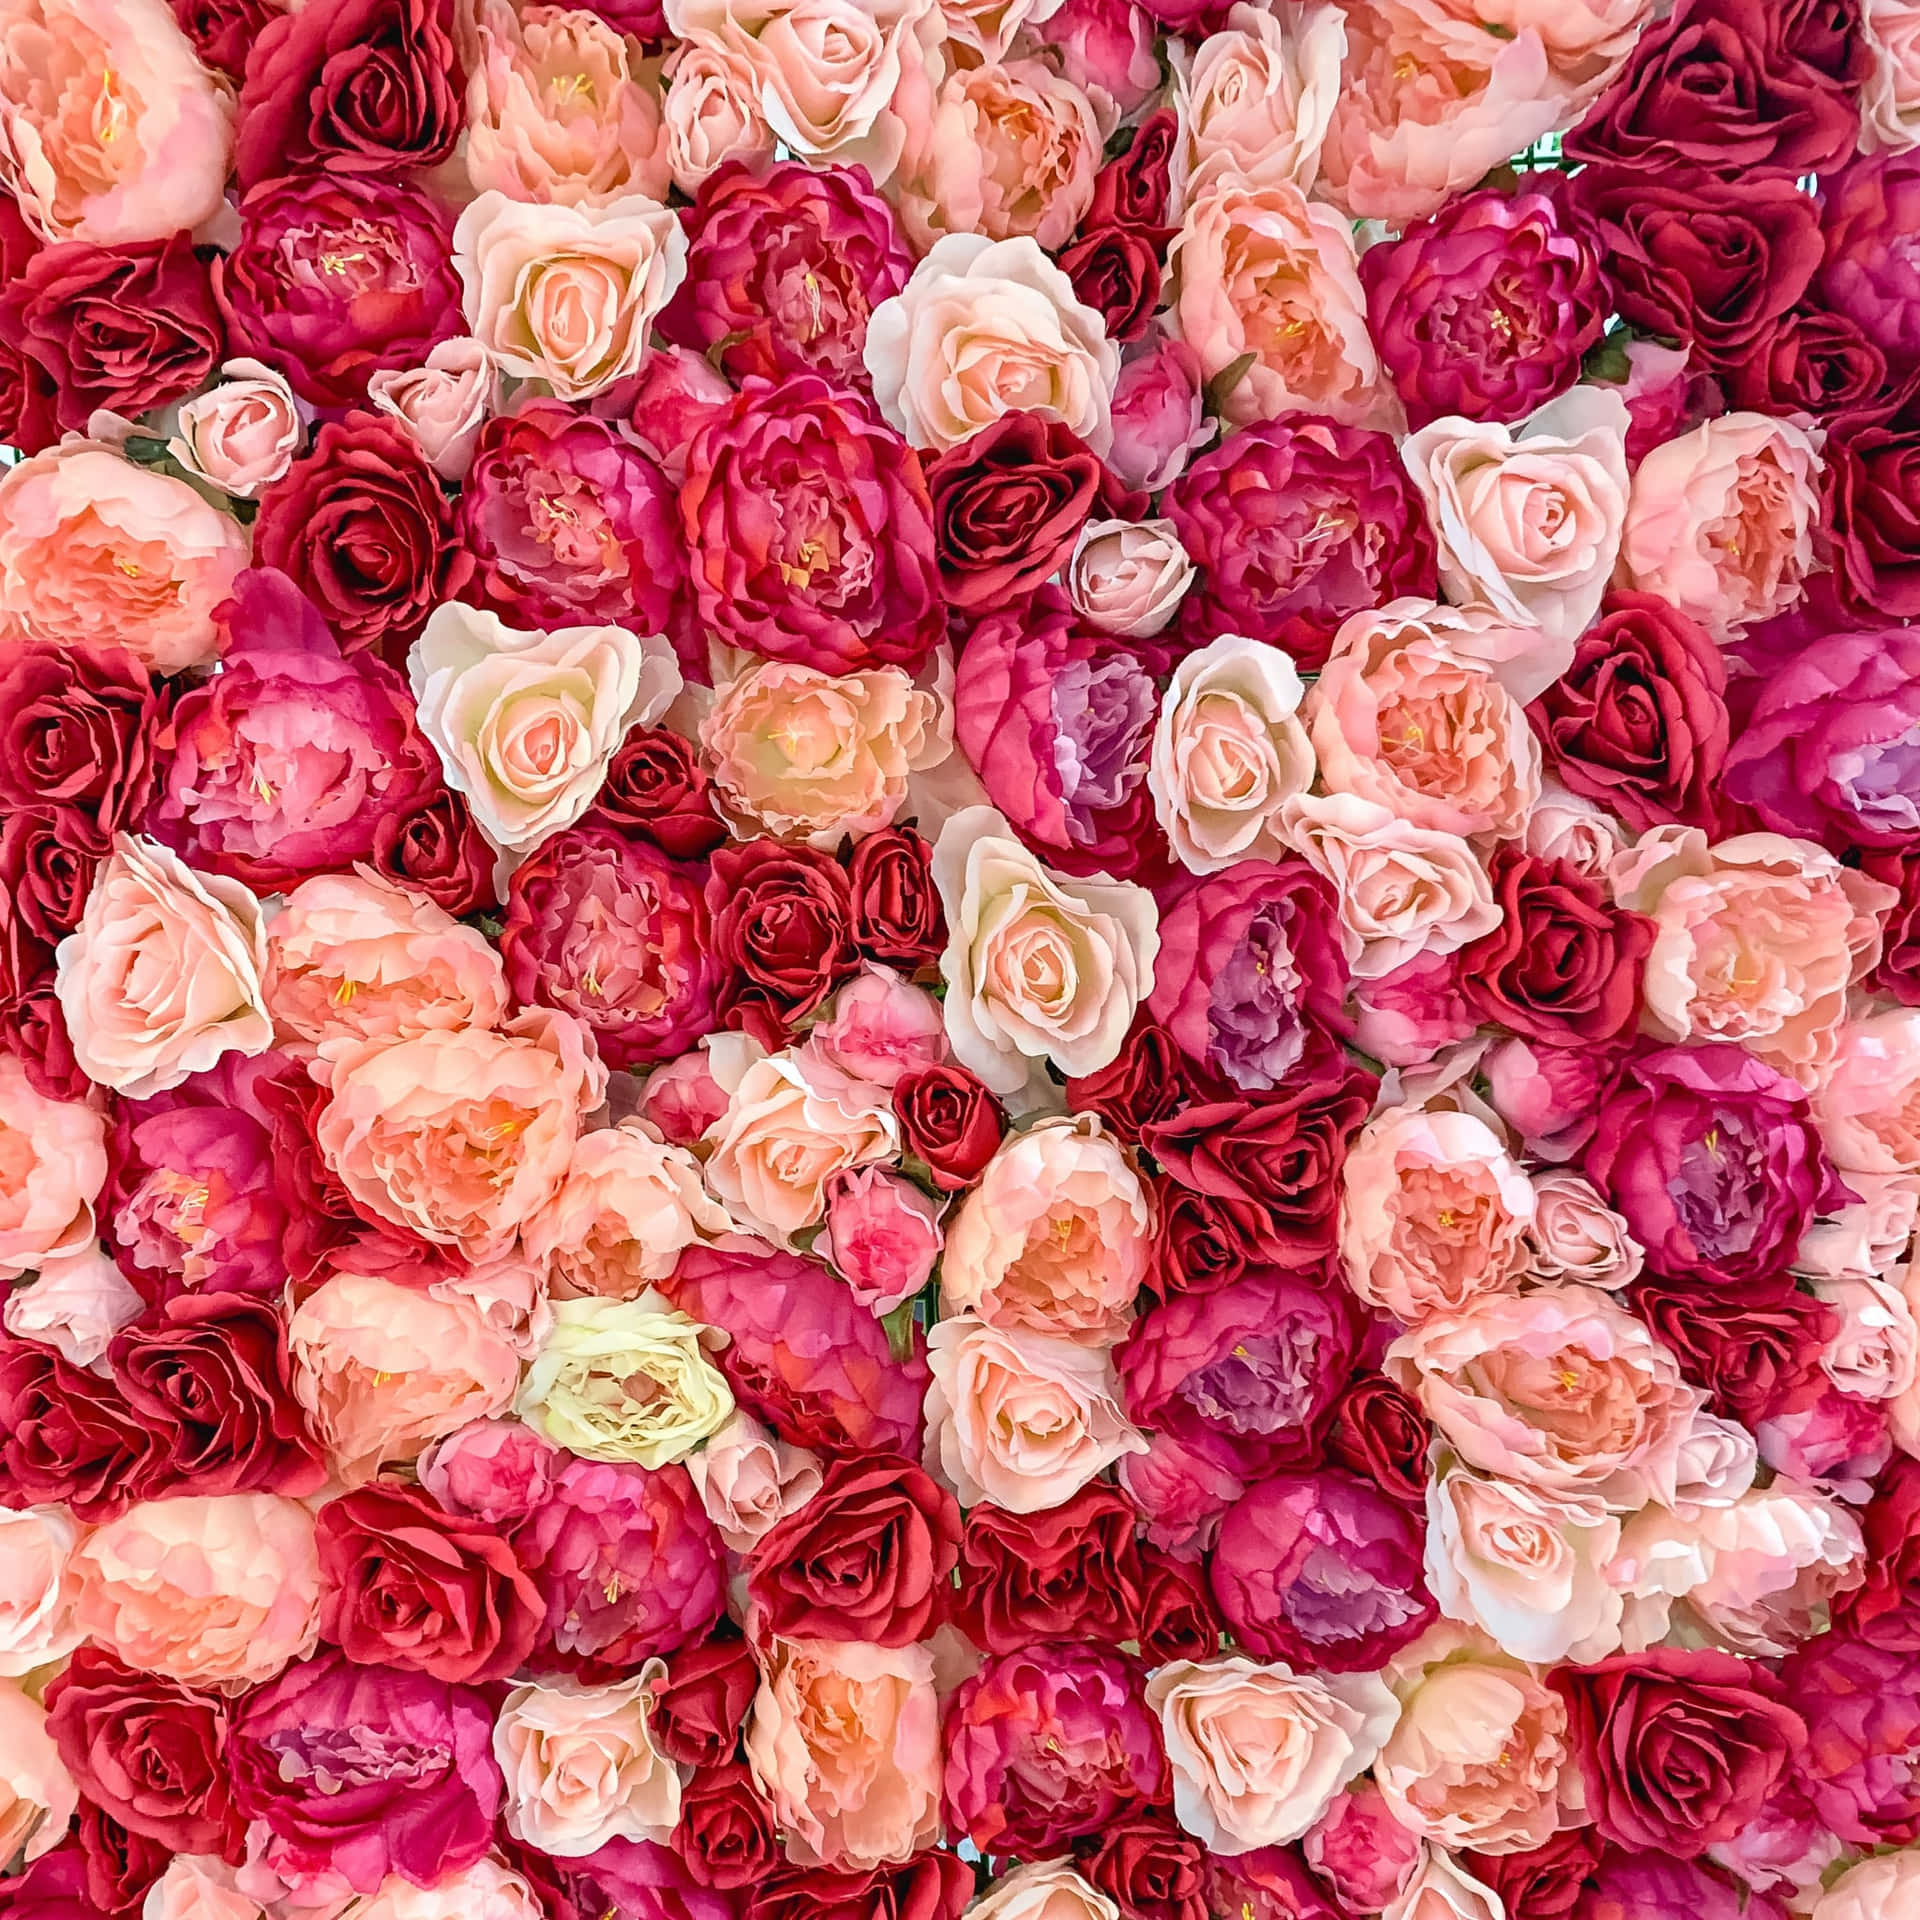 Aesthetic Valentine's Day Bed Of Roses Aerial Photography Wallpaper